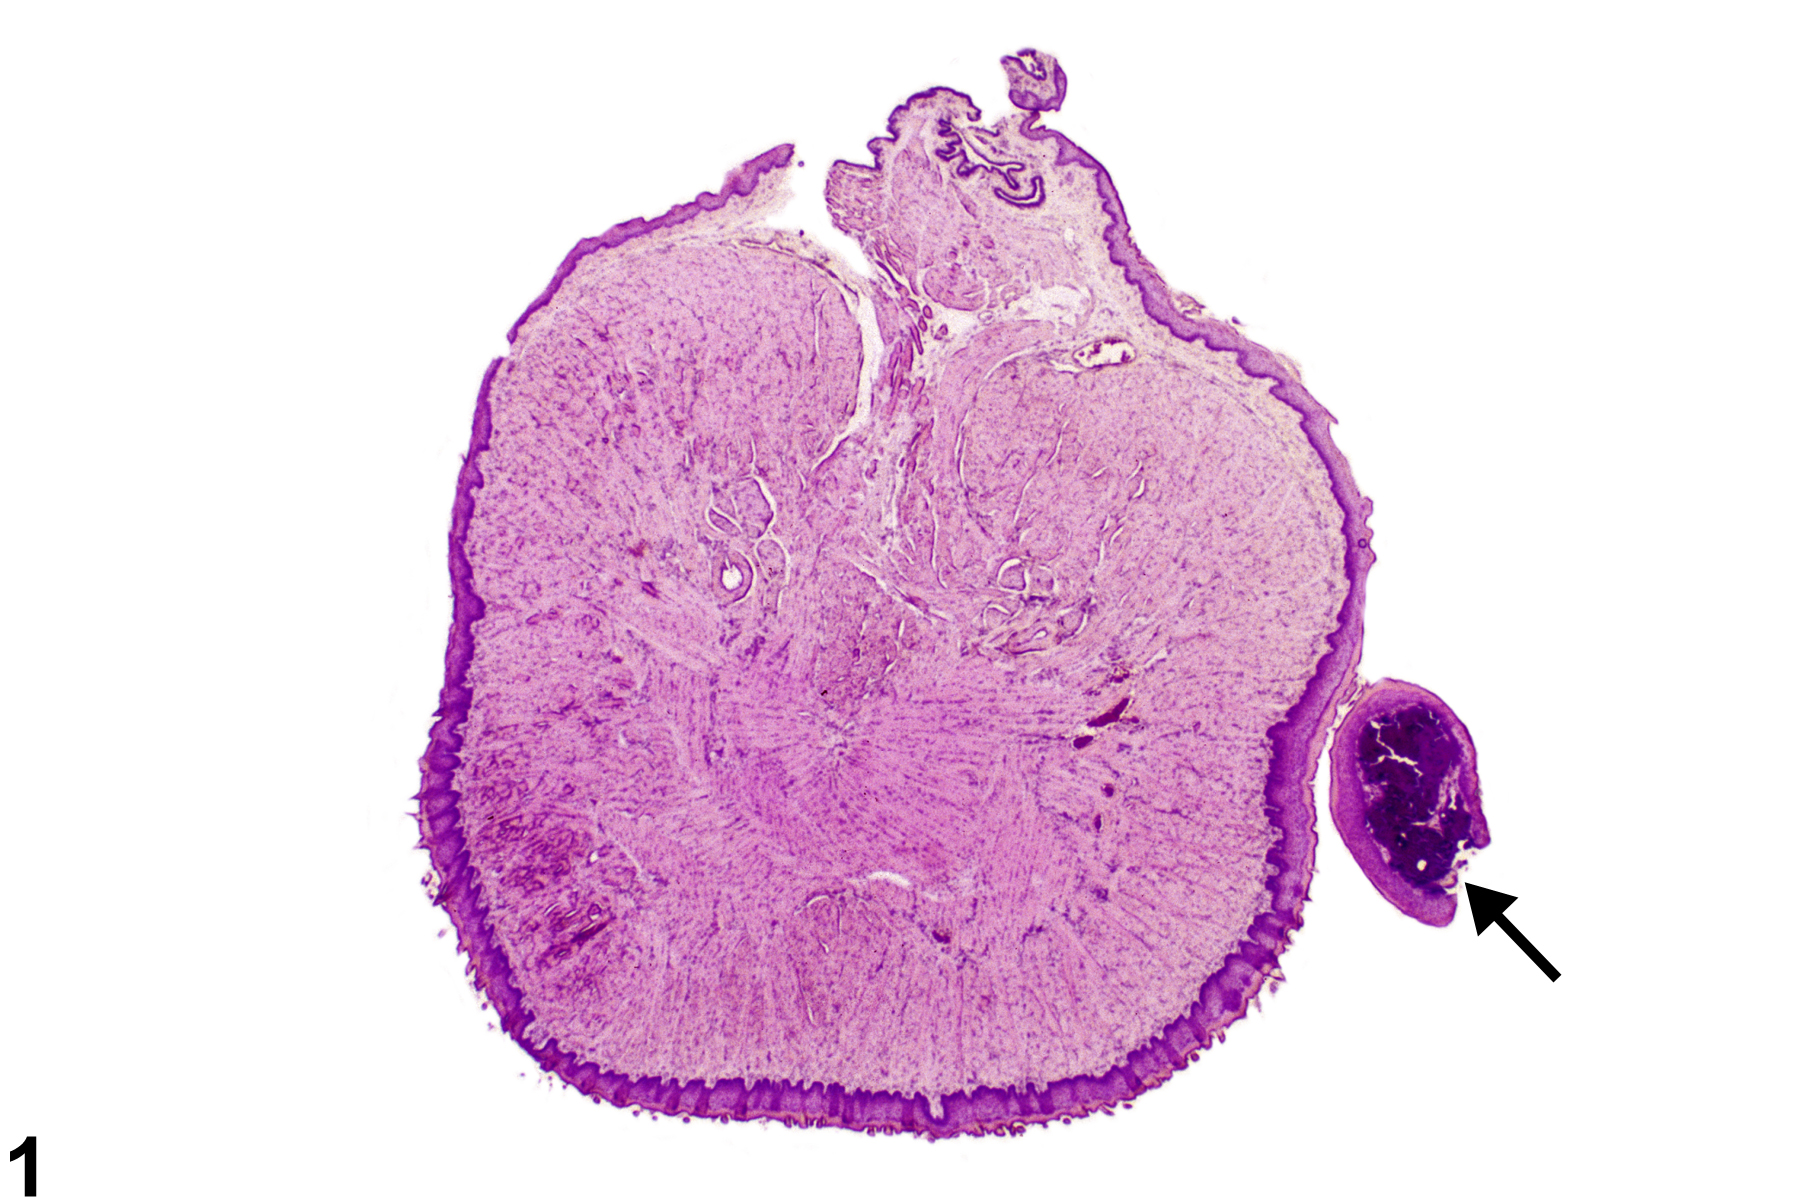 Image of fibroepithelial polyp in the tongue mucosa from a male B6C3F1 mouse in a chronic study